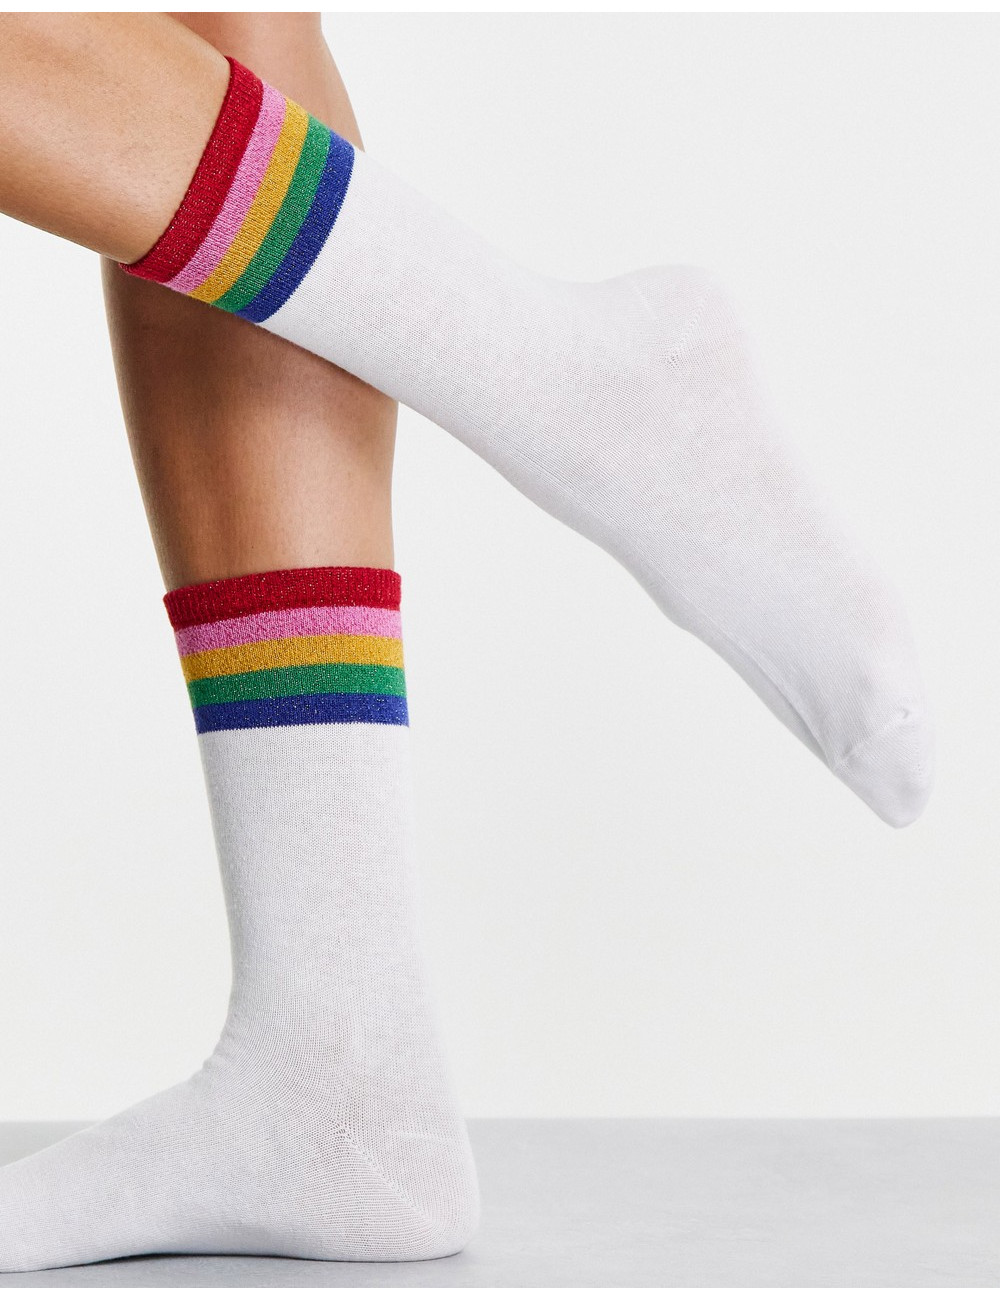 Accessorize socks with...